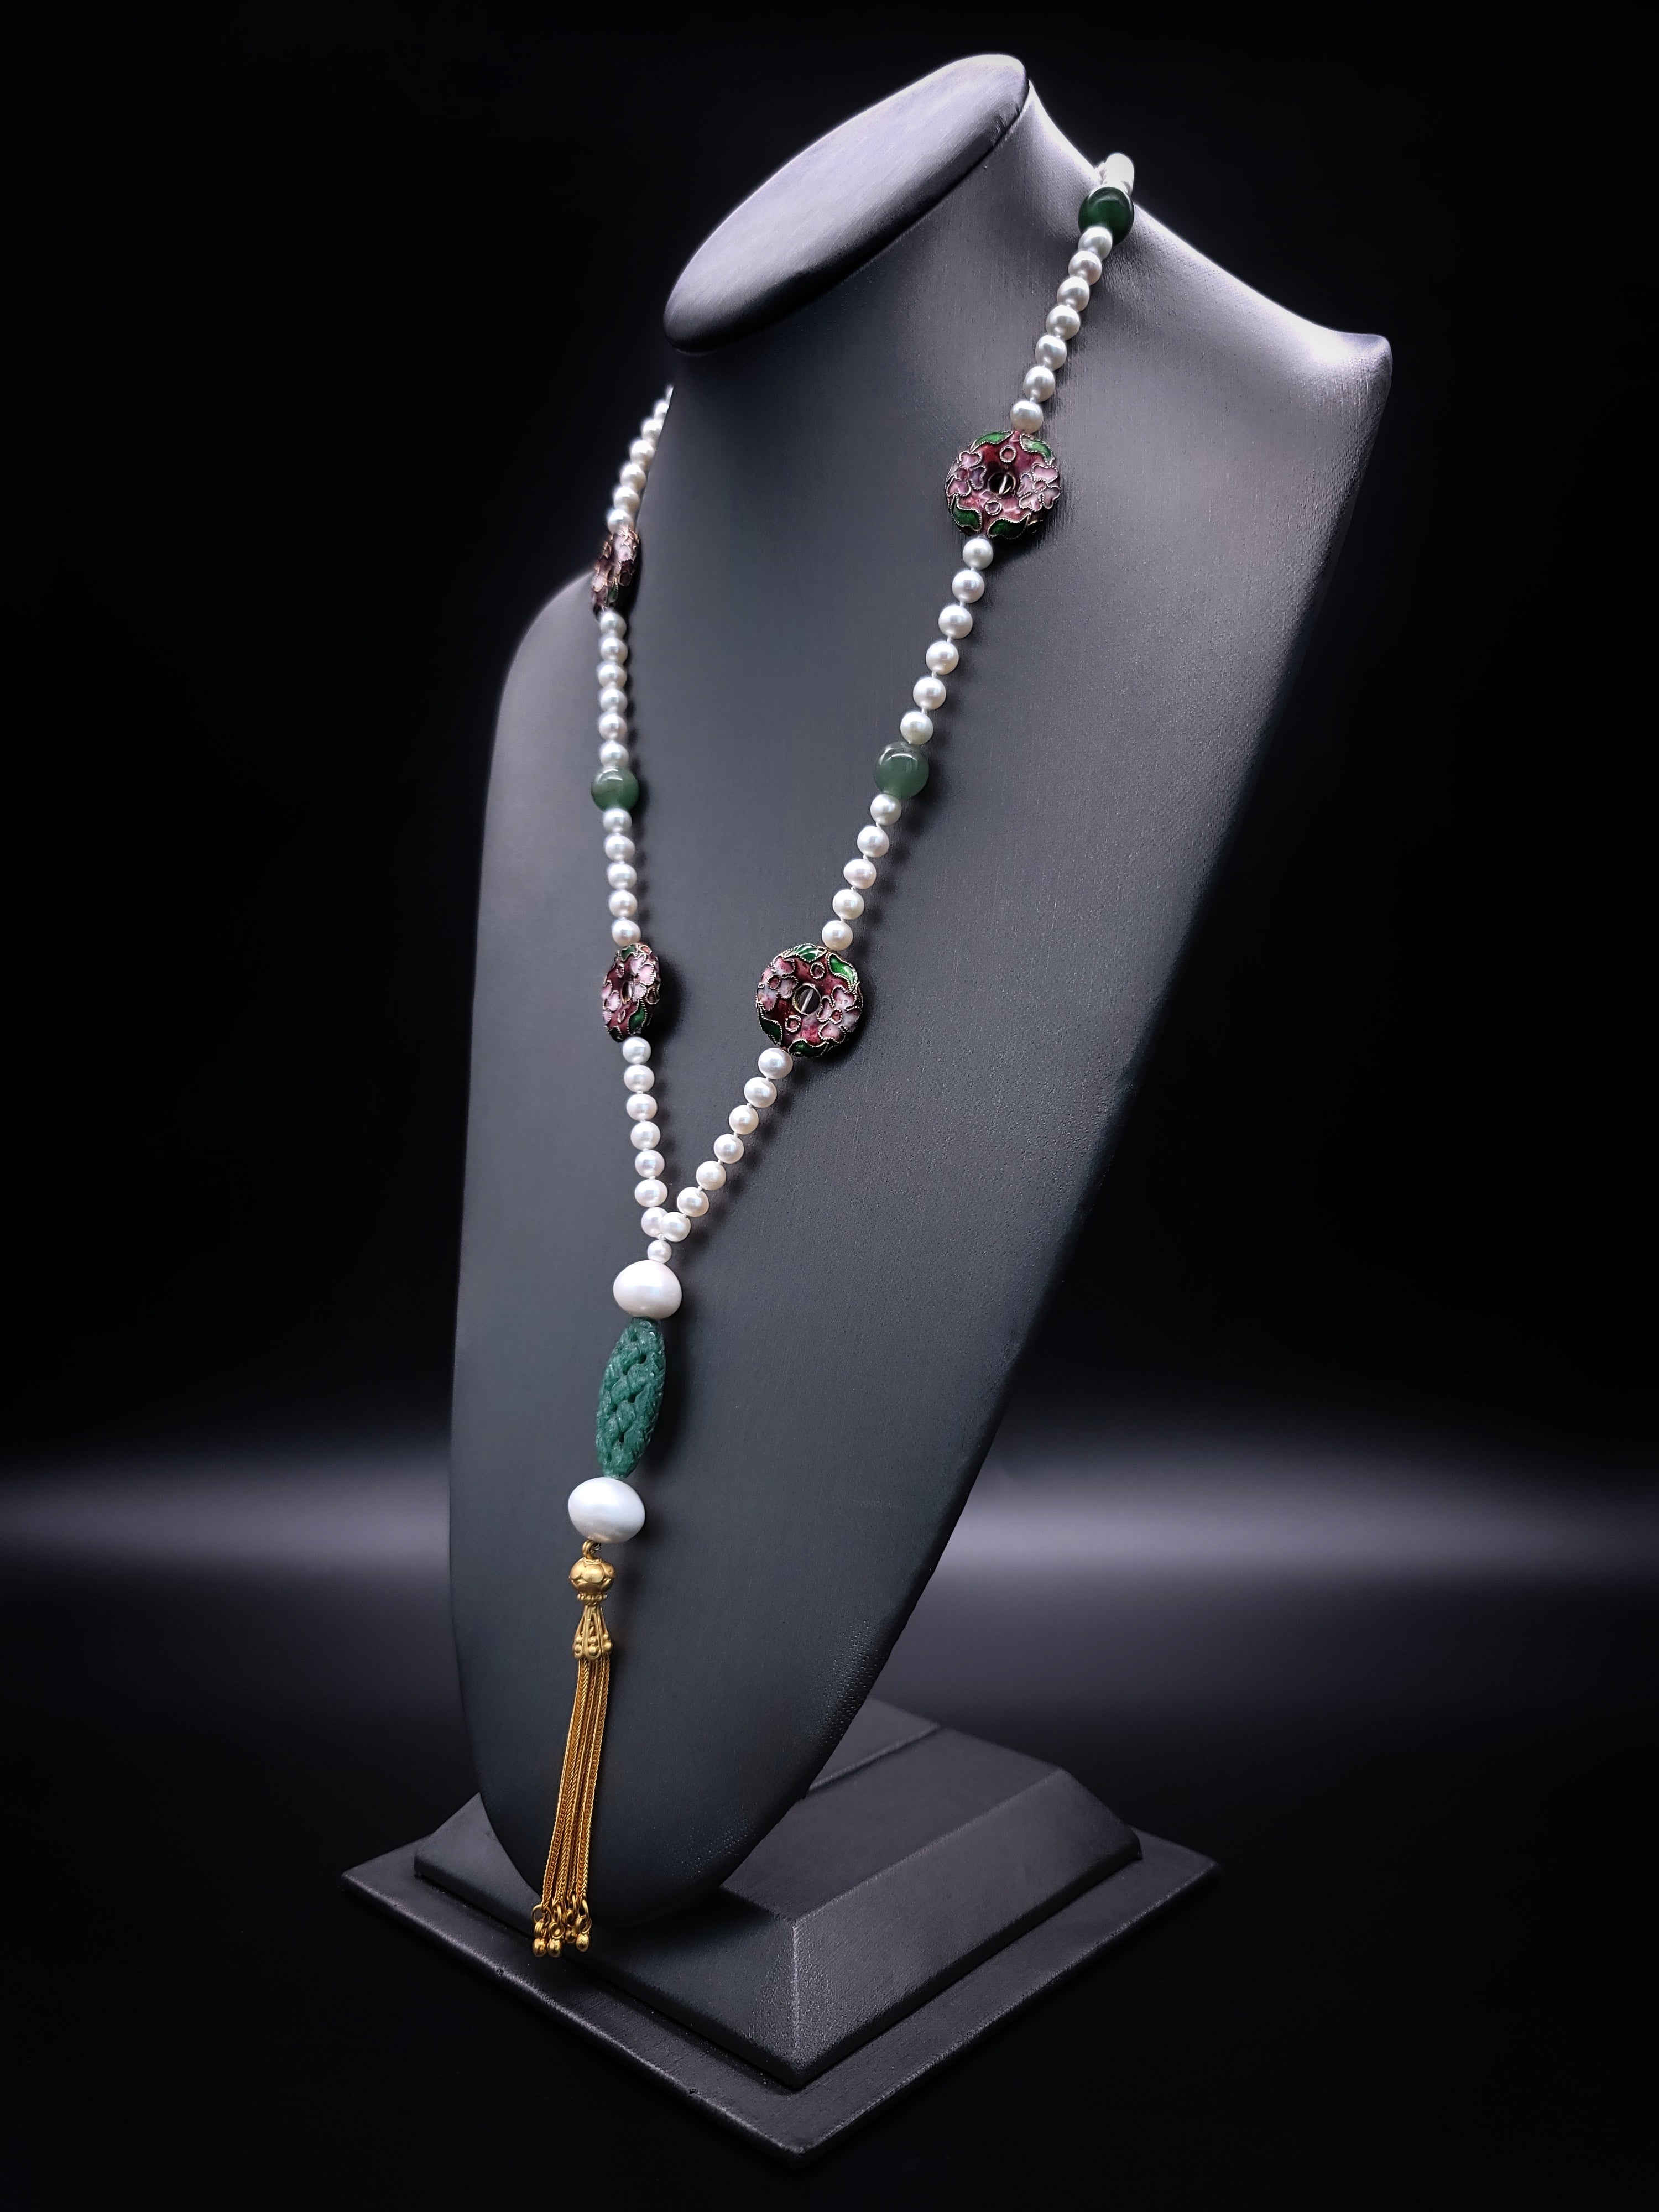 One-of-a-Kind

A colorful 34 “inch necklace. Jade, richly colored Chinese cloisonné, 6mm pearls, mix to make a charming, go with anything, long strand. The  Vermeil tassel assemblage of carved green aventurine and  14mm pearl anchor the necklace.